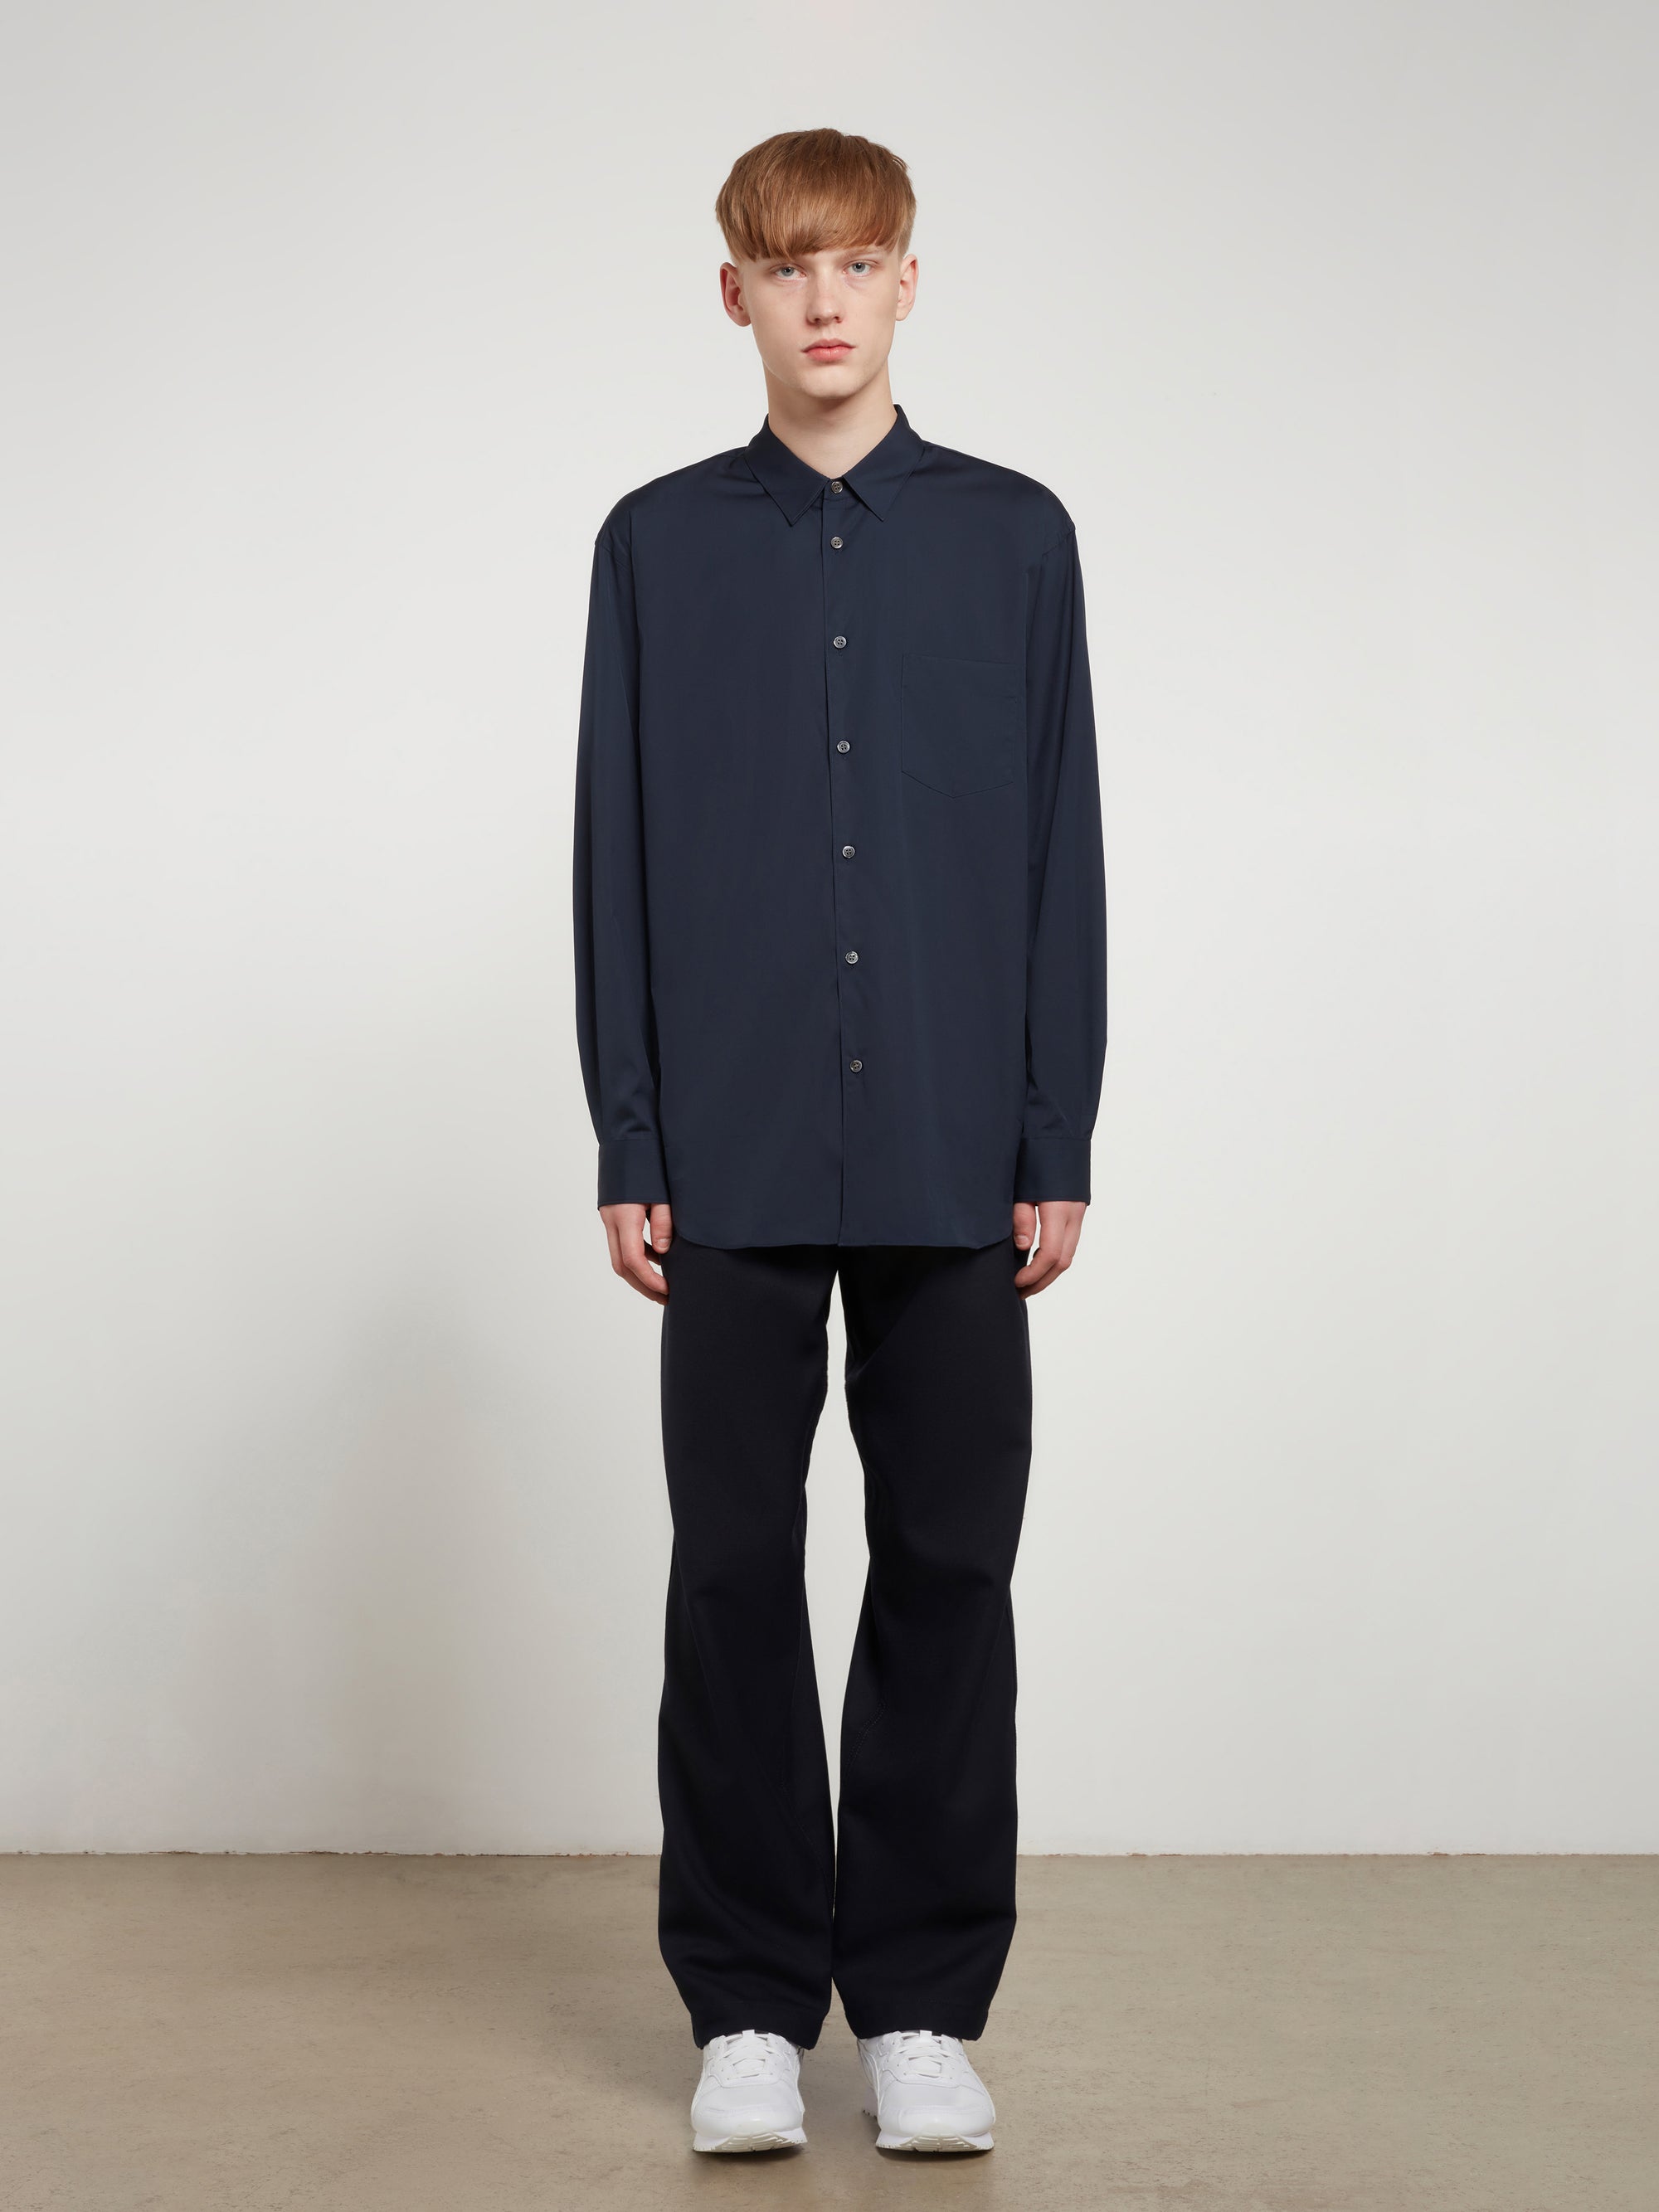 CDG Shirt Forever - Classic Fit Woven Cotton Shirt - (Navy) view 5